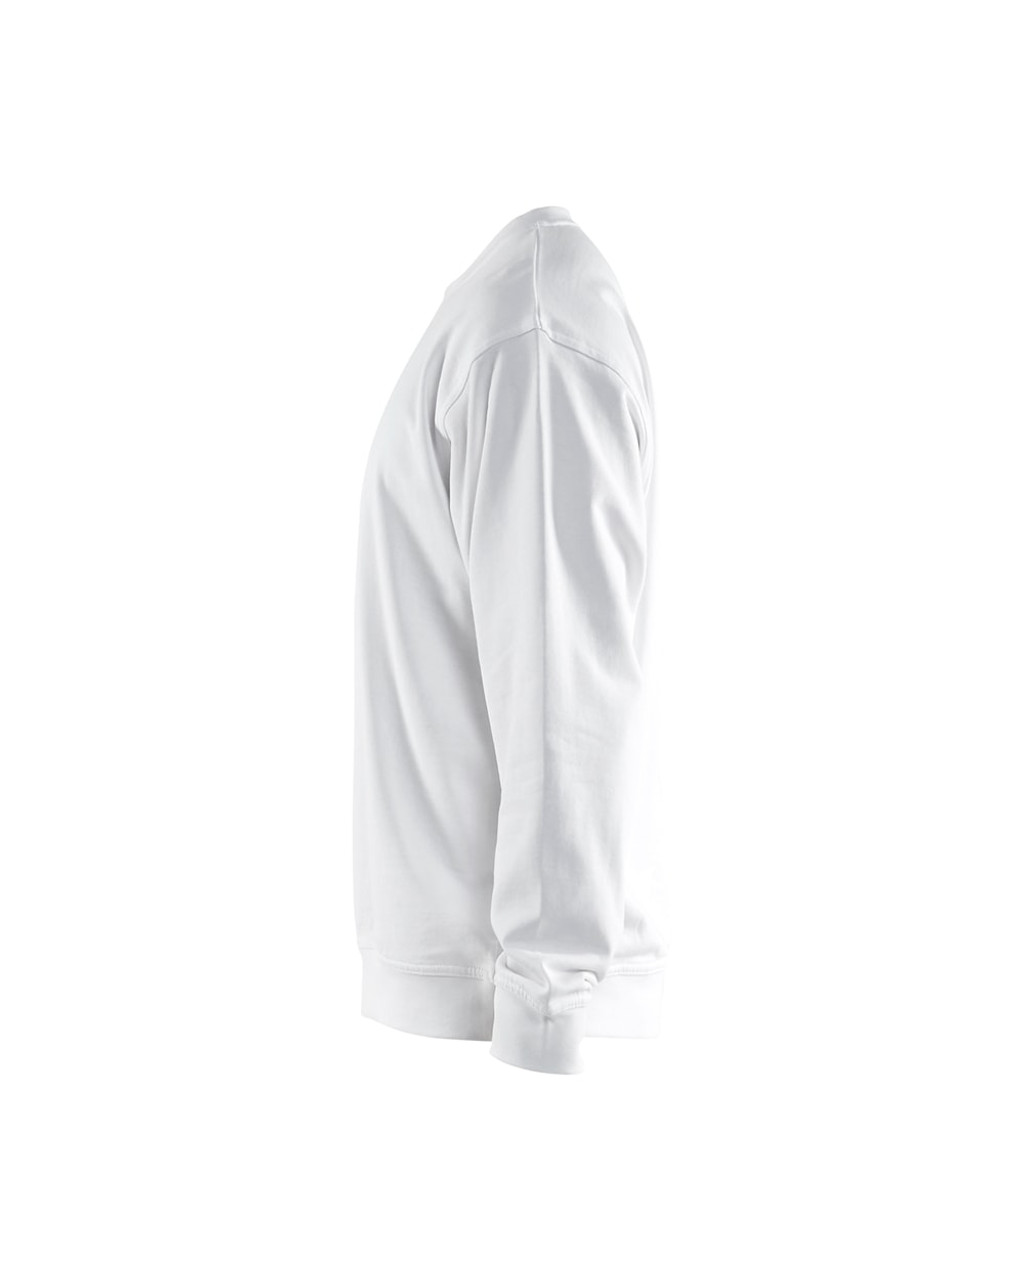 BLAKLADER Cotton White Pullover for Painters that have available in Australia and New Zealand